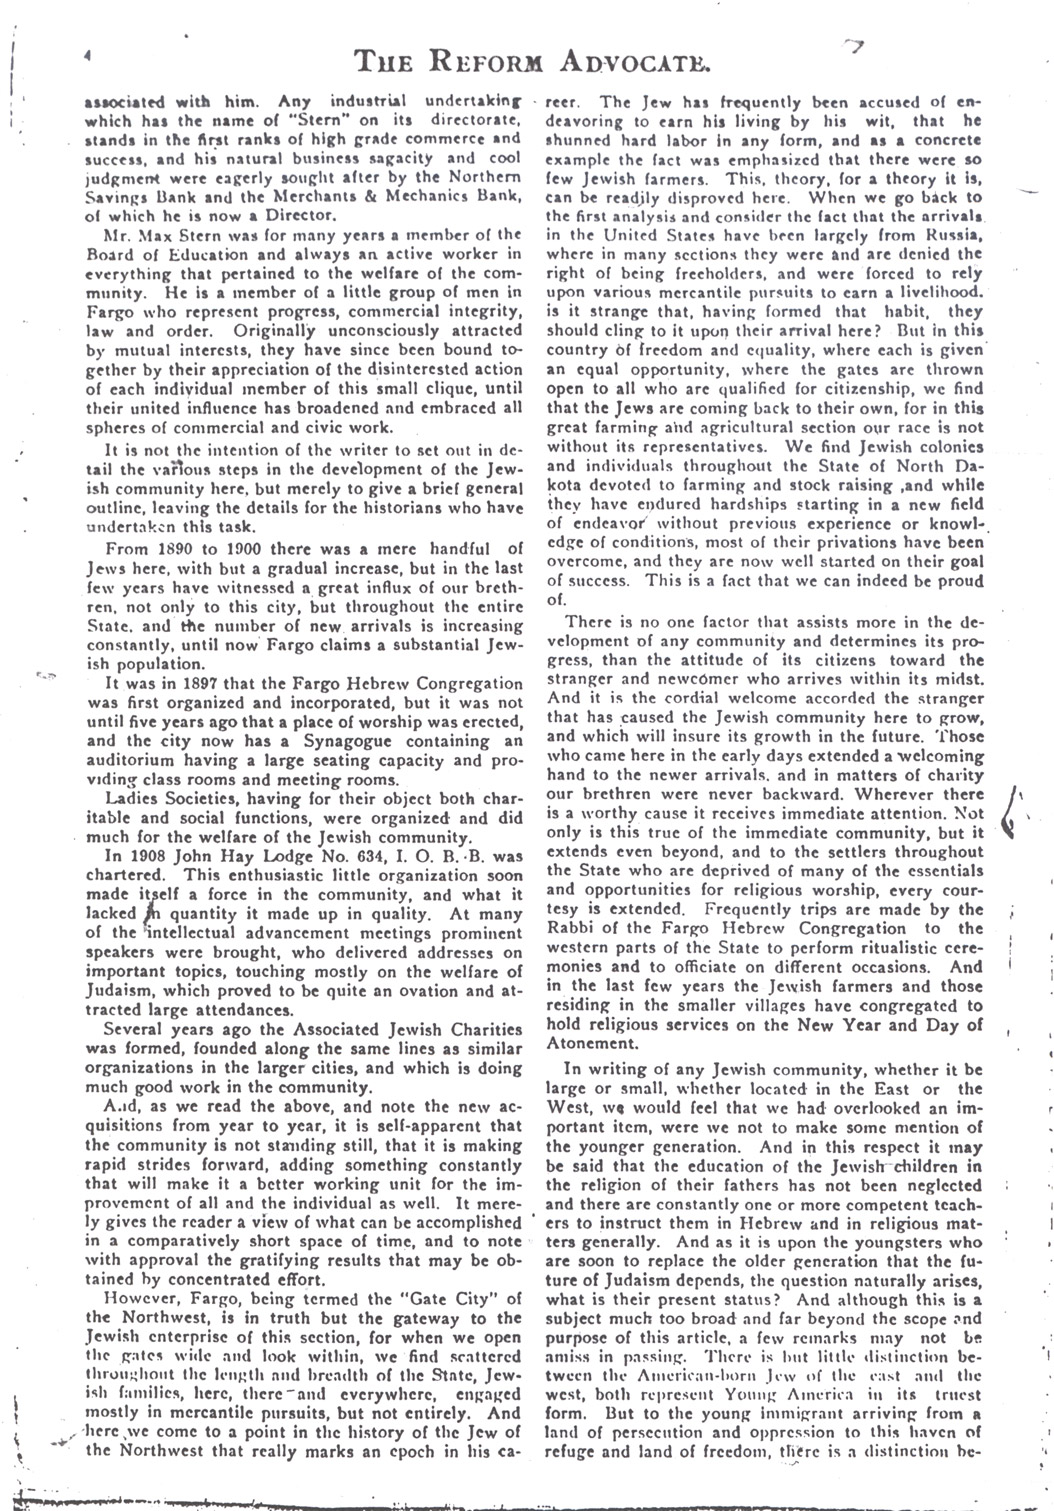 This article, “History of the Jews of Fargo” appeared in a national publication, The Reform Advocate on December 13, 1913. The article tells of the situation of the Jewish community in Fargo and some of the important Jewish city leaders.